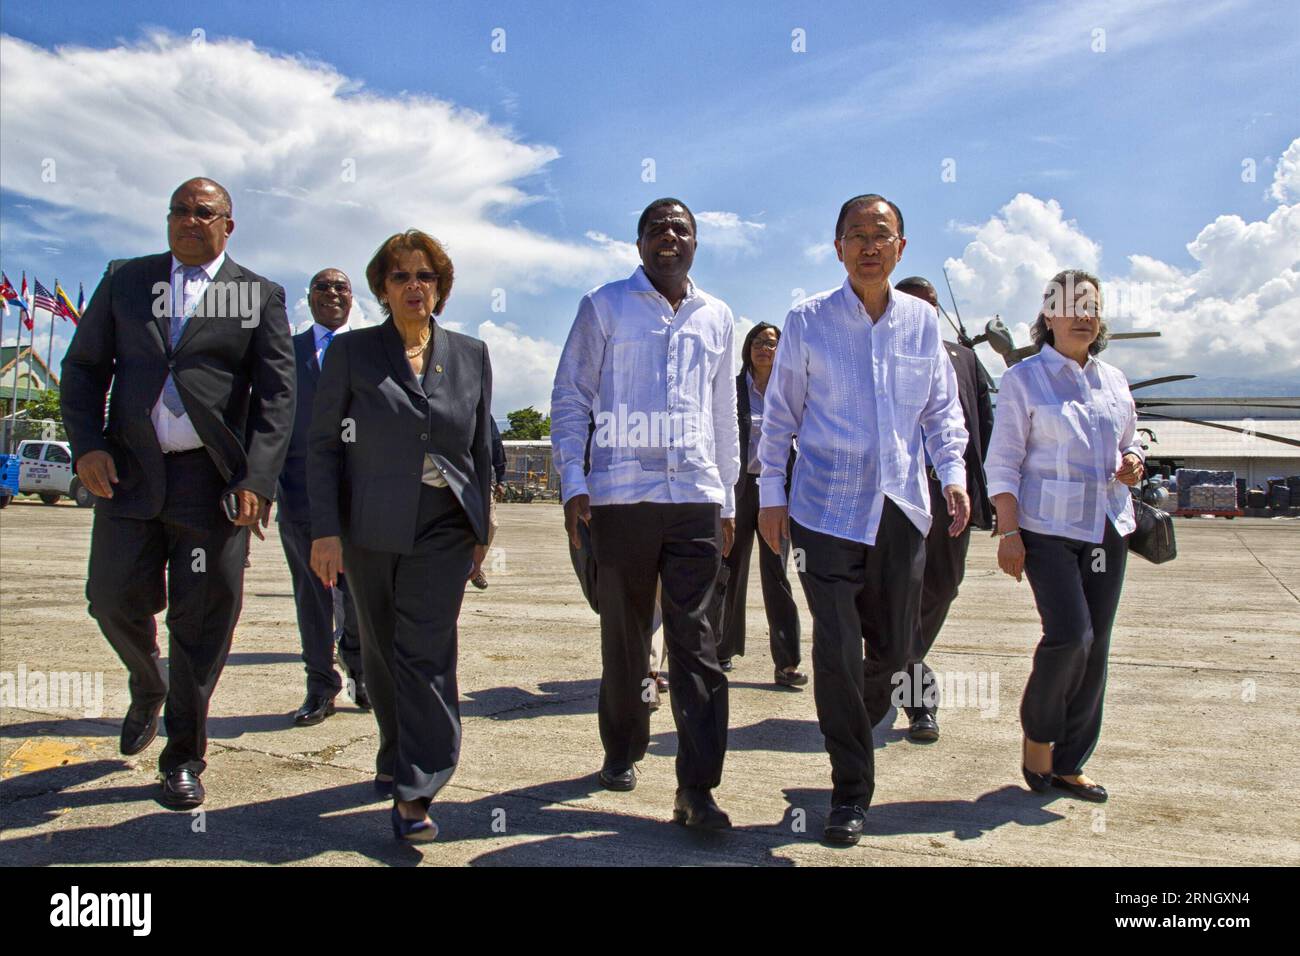 Image provided by the United Nations Stabilization Mission in Haiti (MINUSTAH) shows UN Secretary-General Ban Ki-moon (2nd R) arriving at the Port-au-Prince International Airport, accompanied by Haitian Prime Minister Enex Jean-Charles (C) and UN secretary-general s special representative in Haiti and head of MINUSTAH Sandra Honore (2nd L), in Port-au-Prince, Haiti, on Oct. 15, 2016. Ban arrived on Saturday in Haiti to make a tour to the areas hardest hit by Hurricane Matthew and met with government officials and humanitarian organizations working in the country. MINUSTAH) (jg) (fnc) MANDATORY Stock Photo